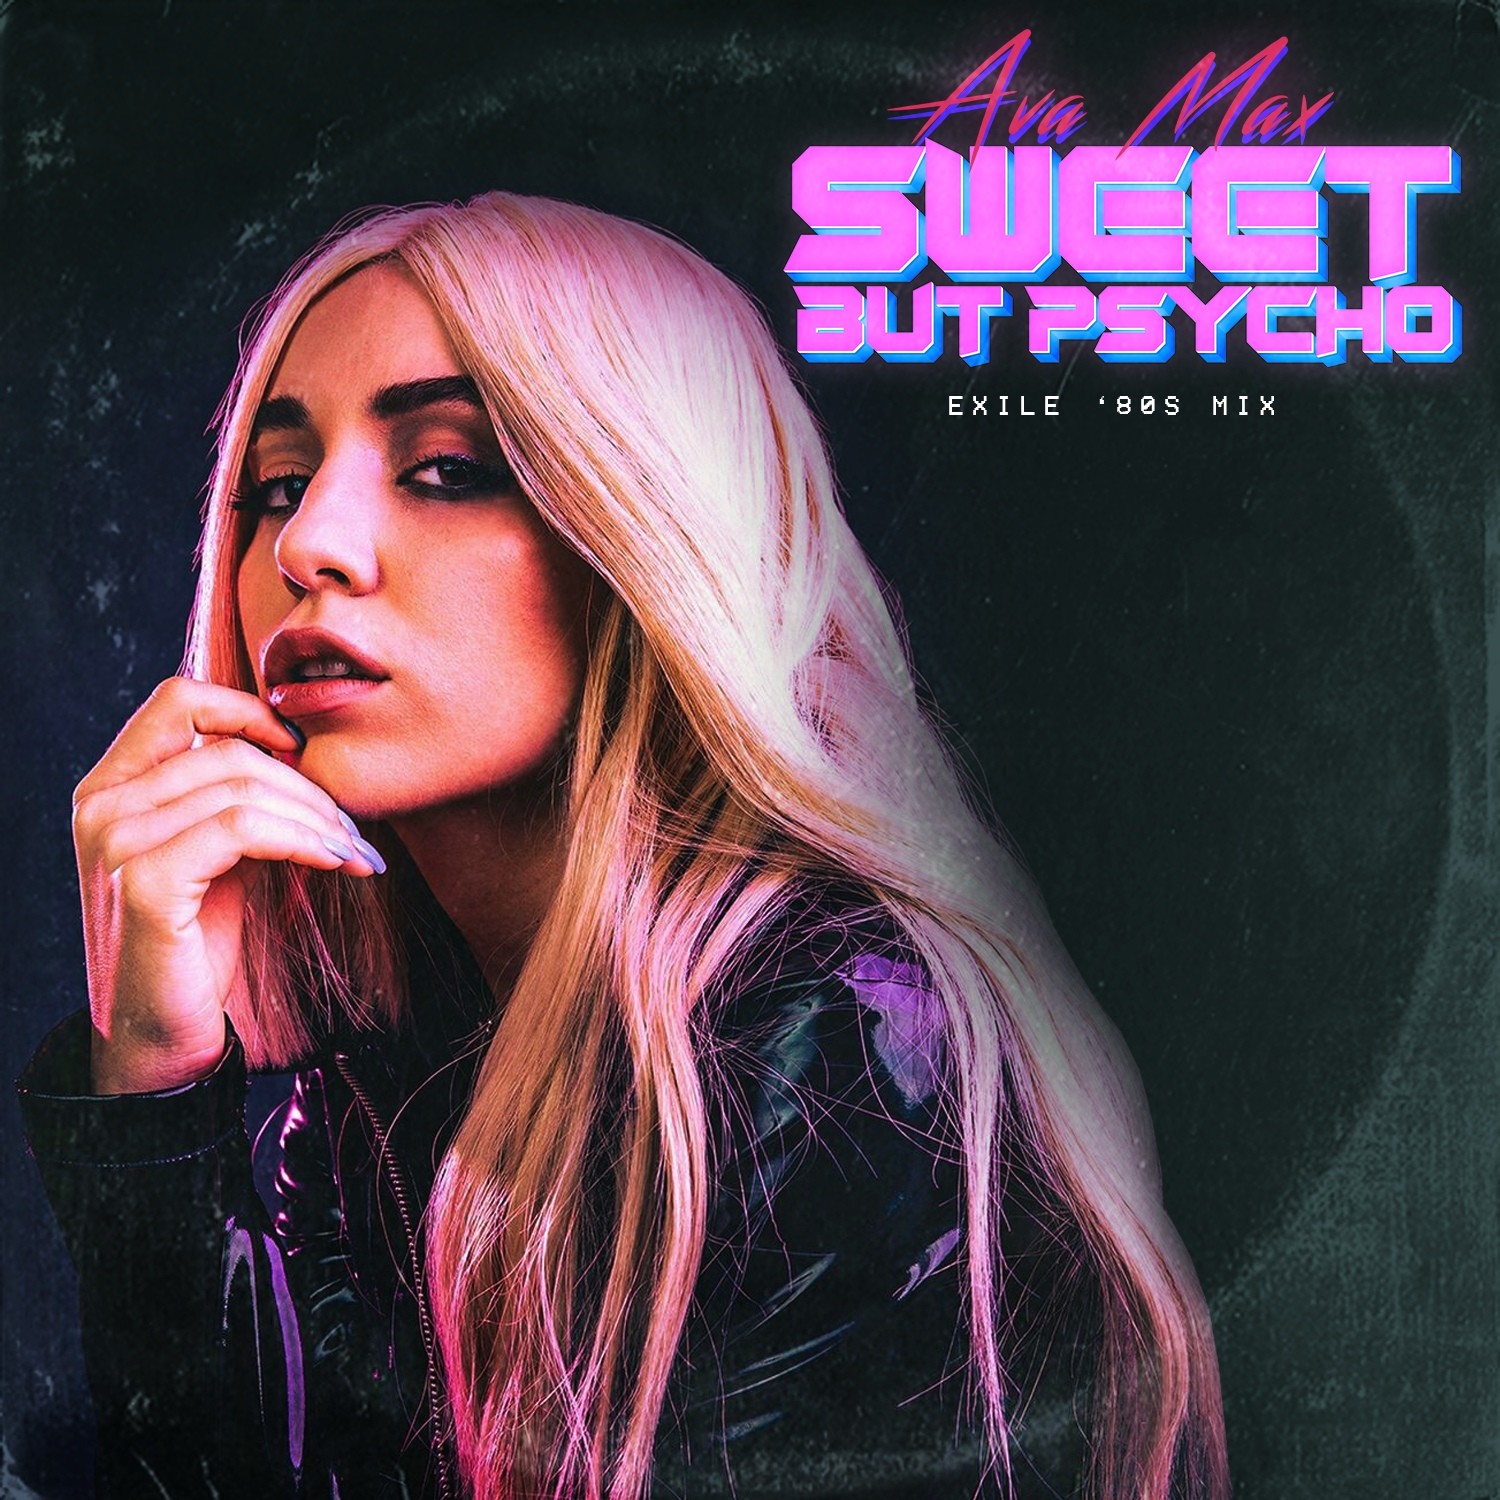 Sweet by psycho. Ава Макс Sweet but Psycho. Ava Max Psycho. Ava Max Sweet by Psycho. Ava Max Sweet by Psycho клип.